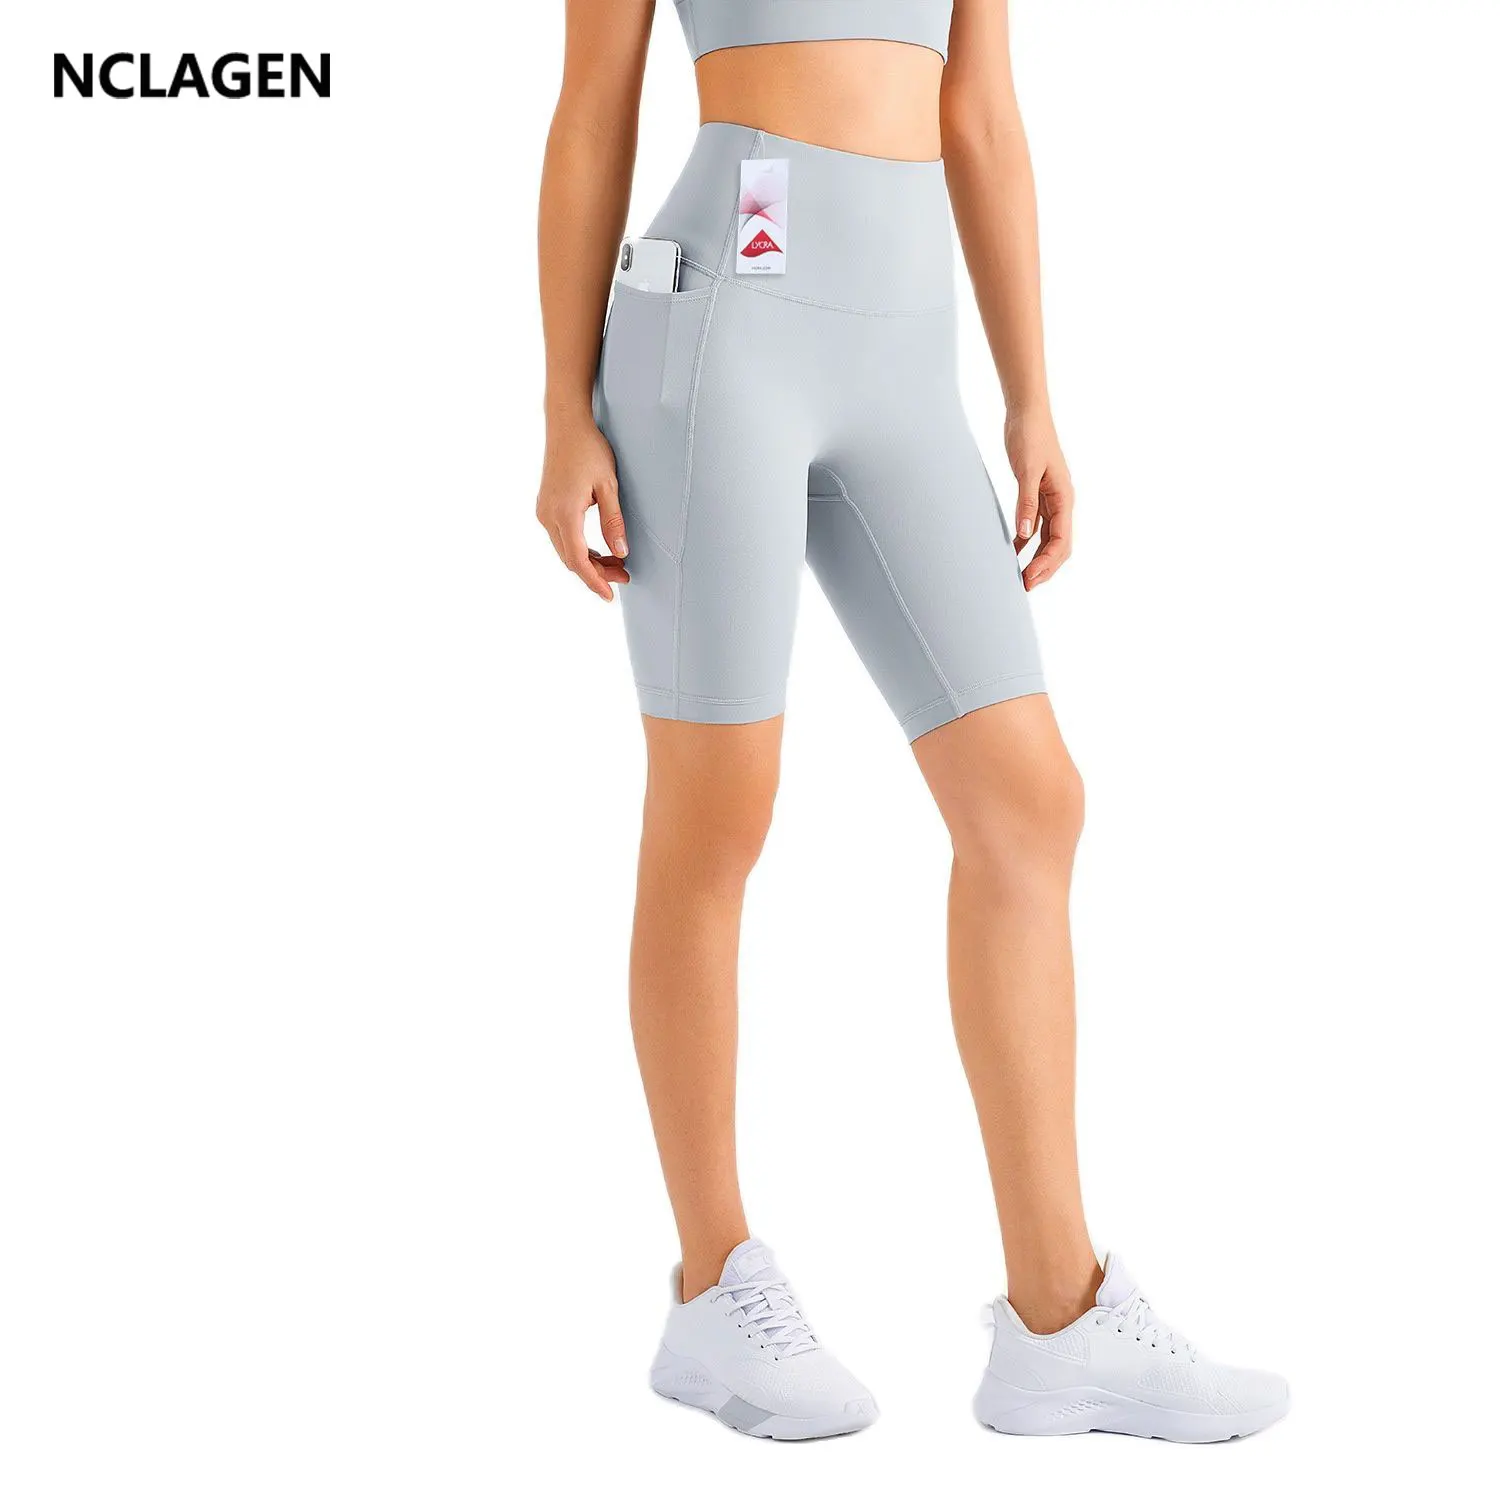 

NCLAGEN Gym Short Sports Women's Yoga Bermuda Shorts High Waist With Pockets Naked Feel Quick Dry Hip Lifting Fitness Bottoms